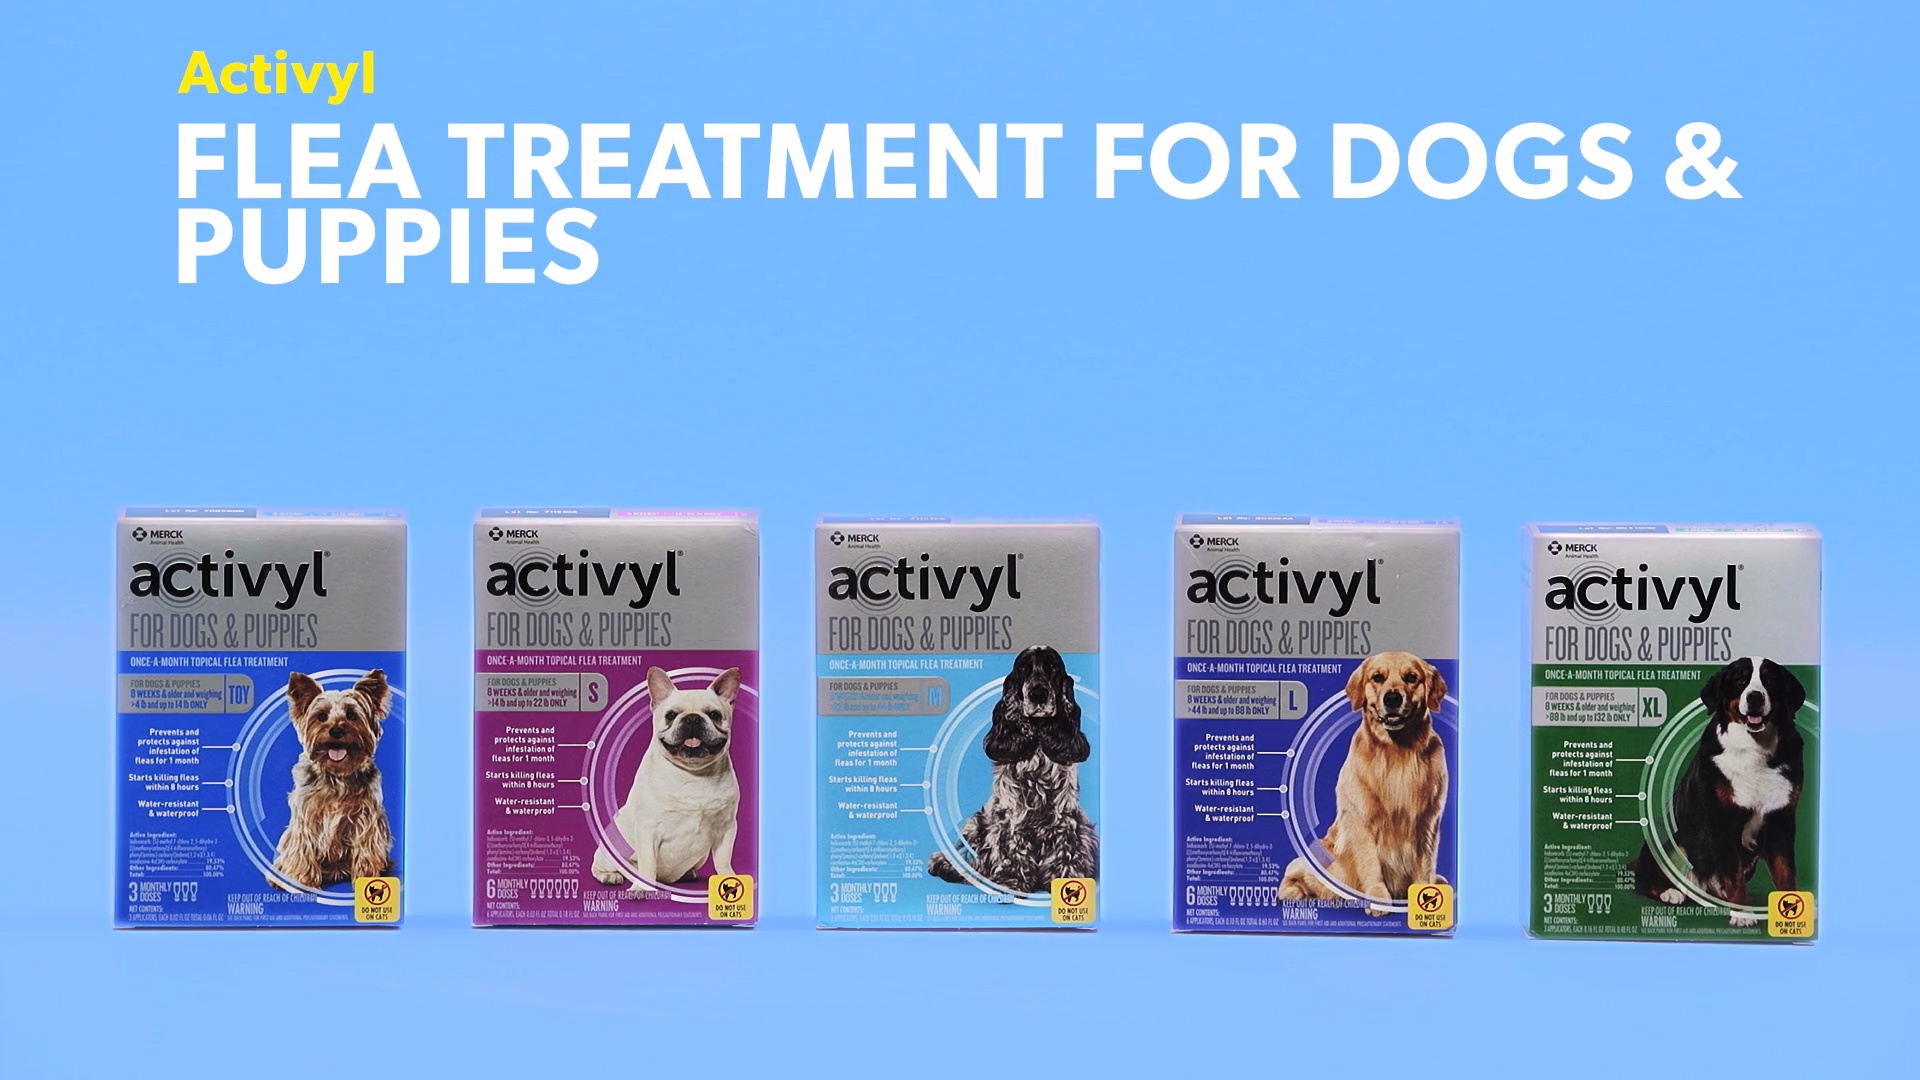 activyl for dogs